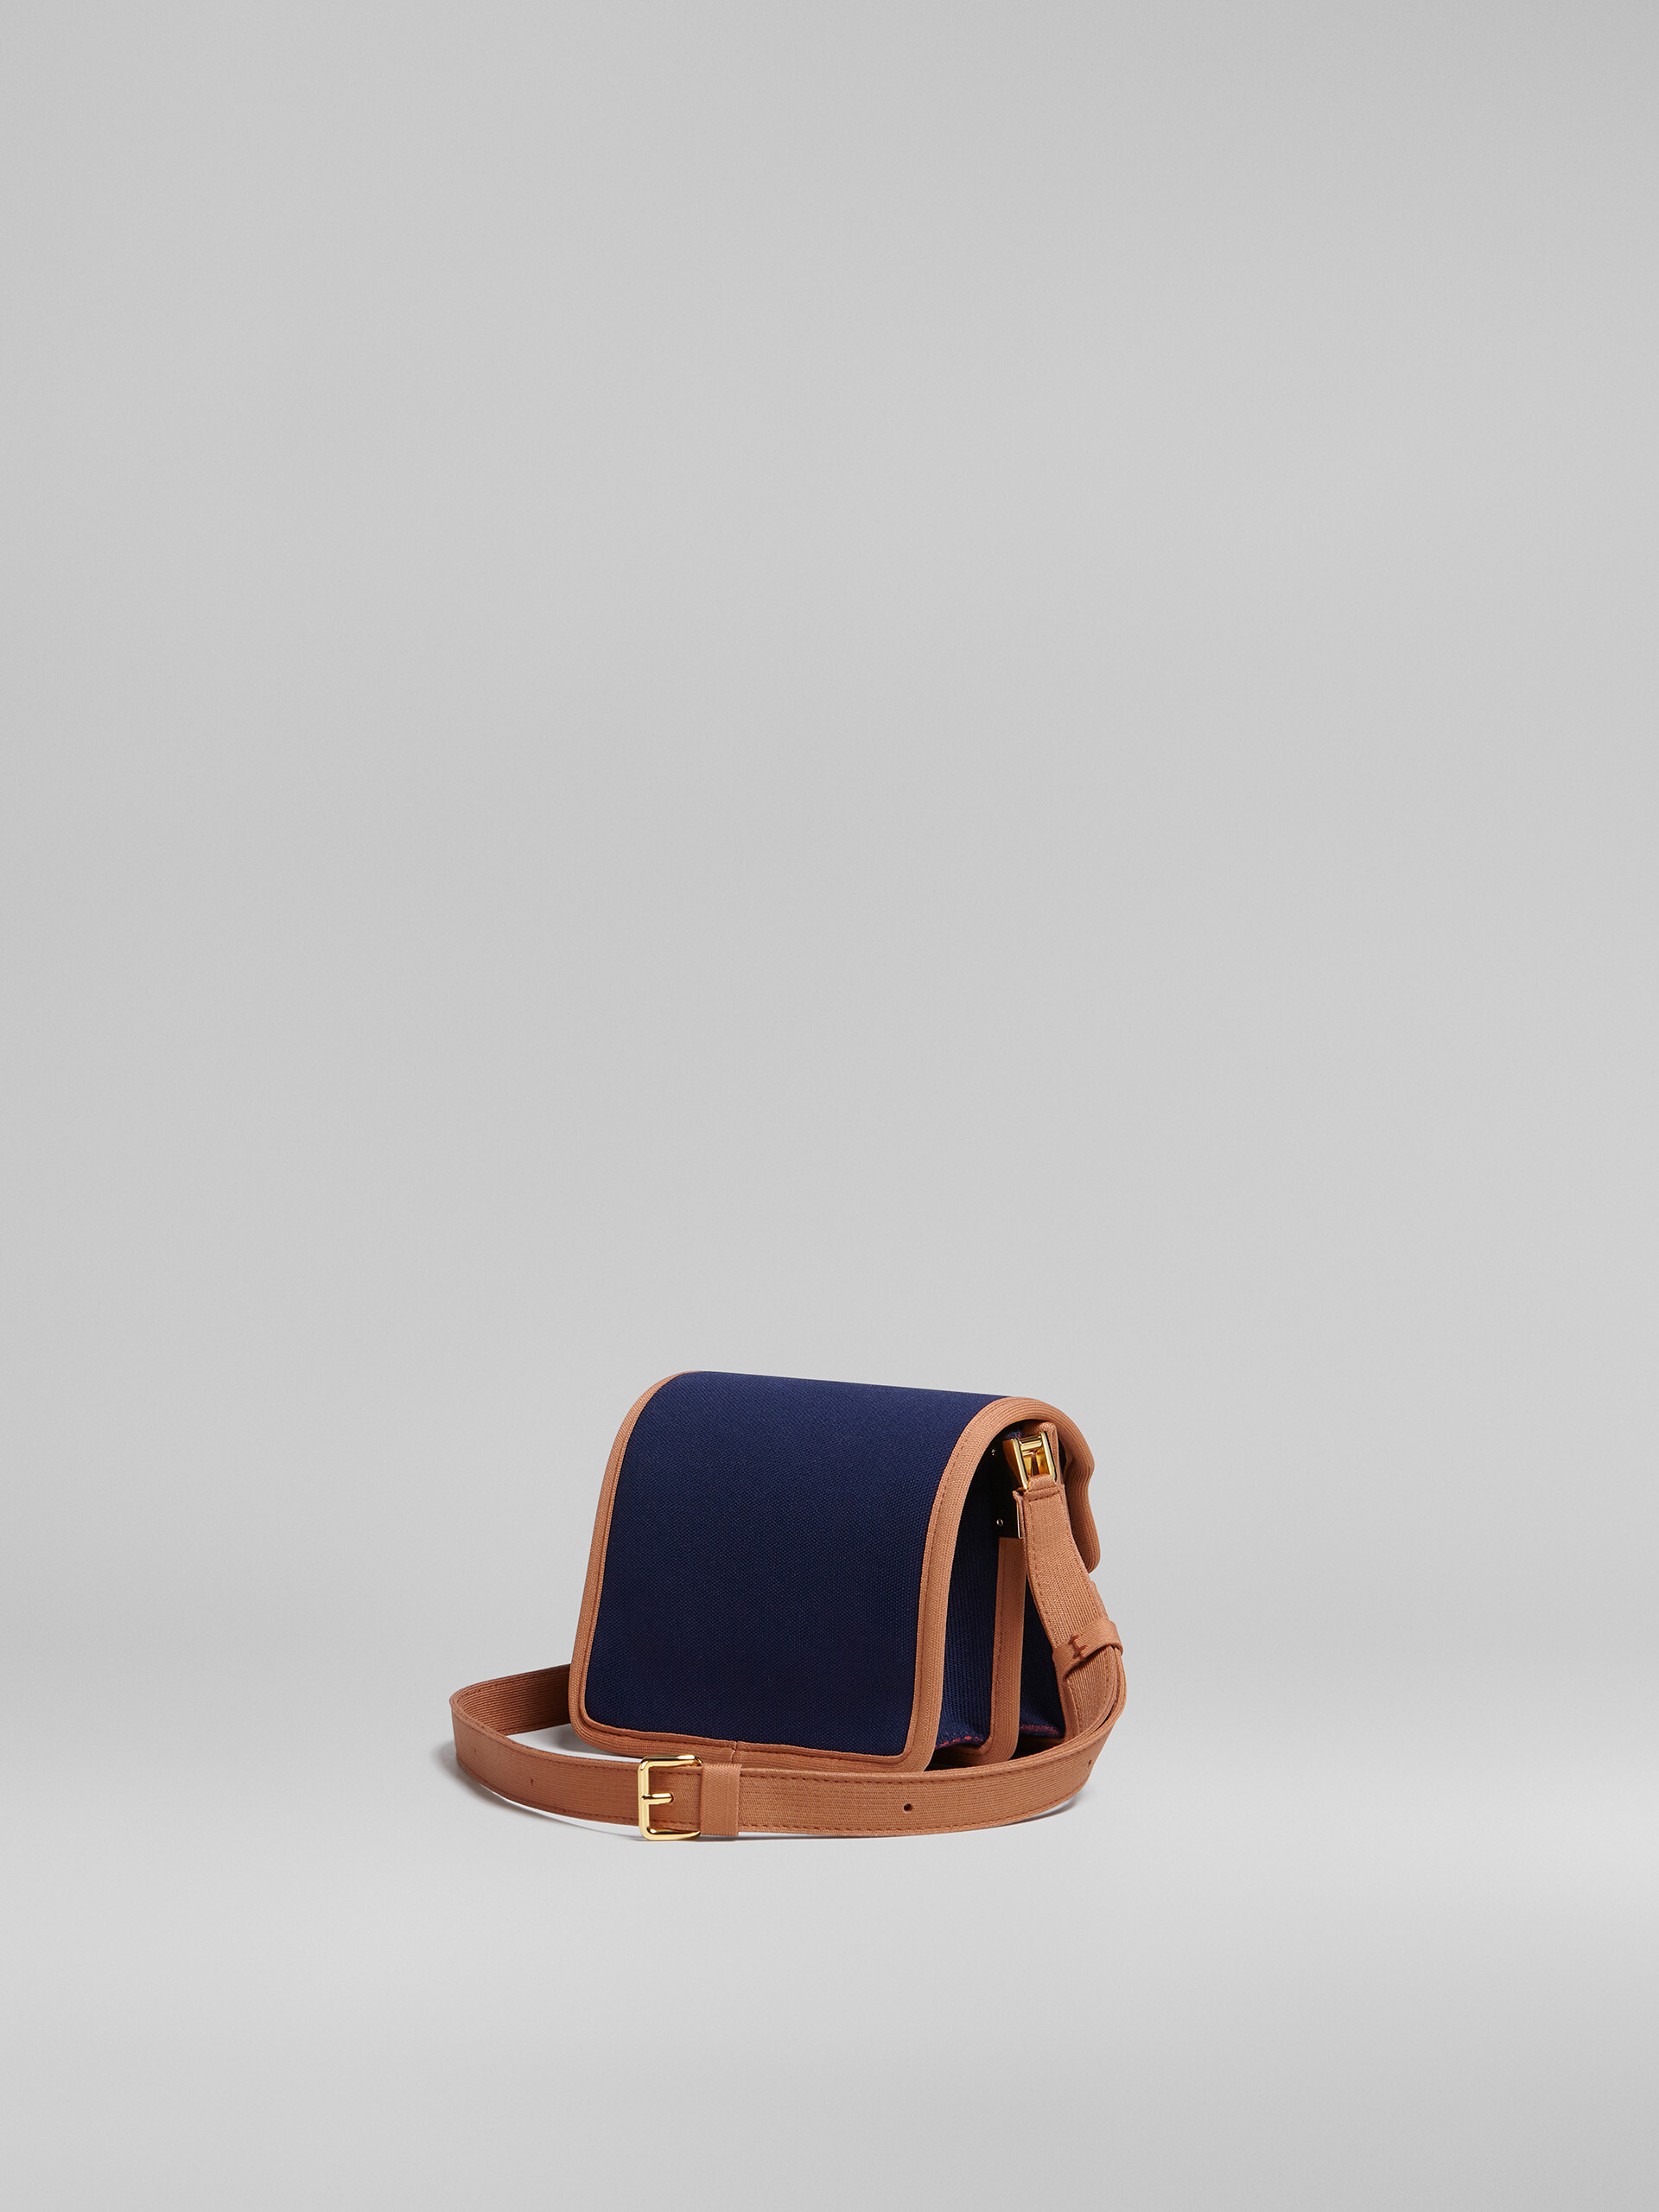 TRUNK SOFT mini bag in blue and brown jacquard - Shoulder Bags - Image 3